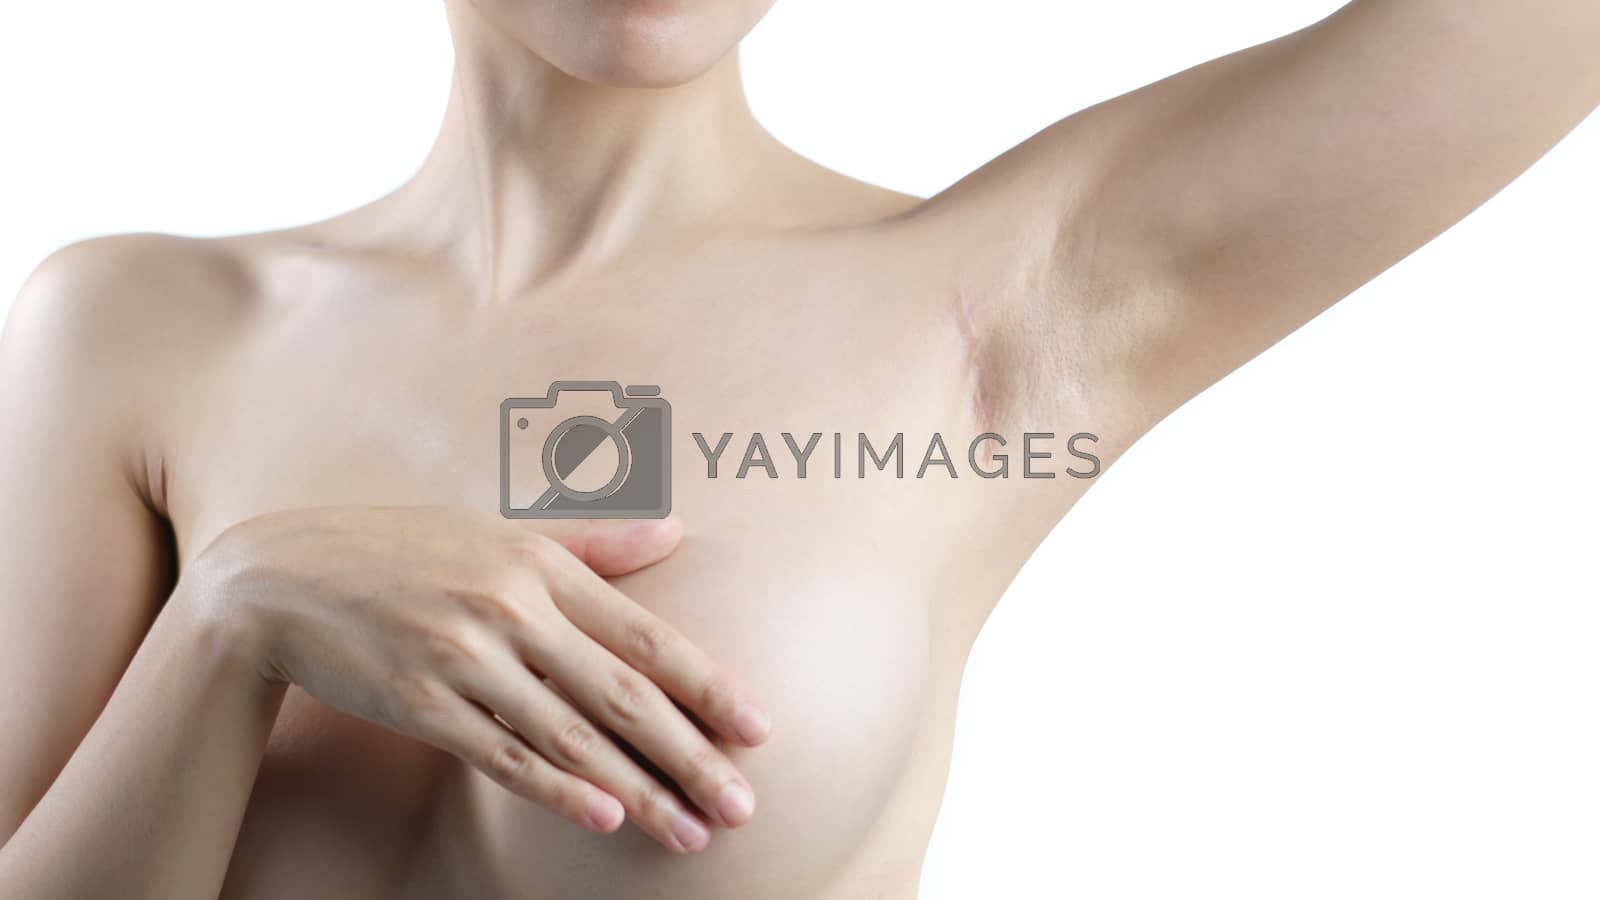 Royalty free image of Woman showing keloids or scar on the armpit after breast surgery by sirawit99